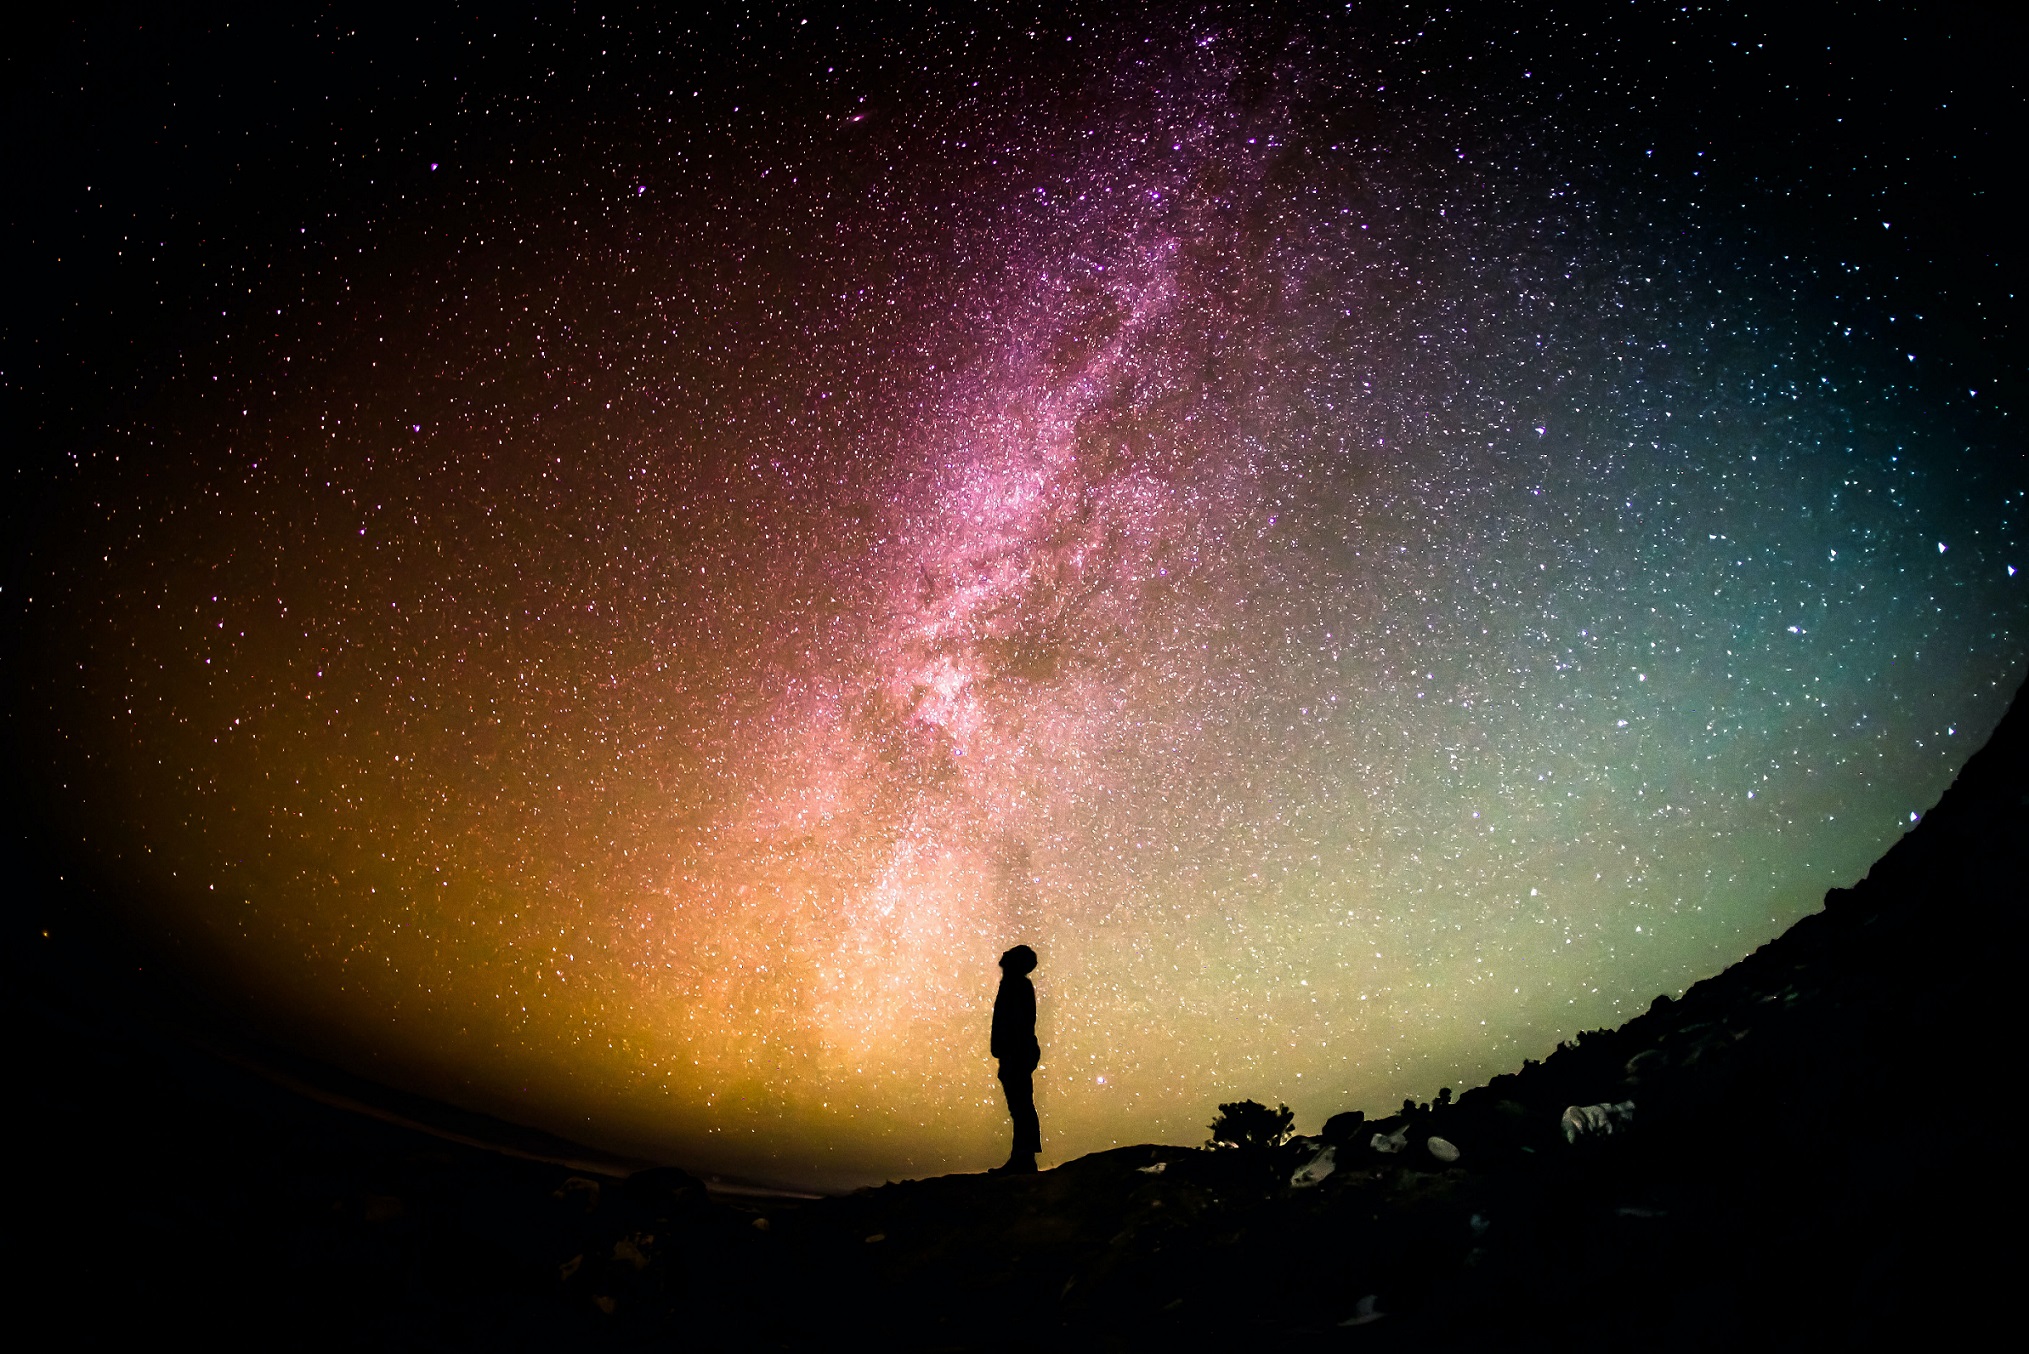 A lone human figure in shadow against the vast, star-filled night sky.